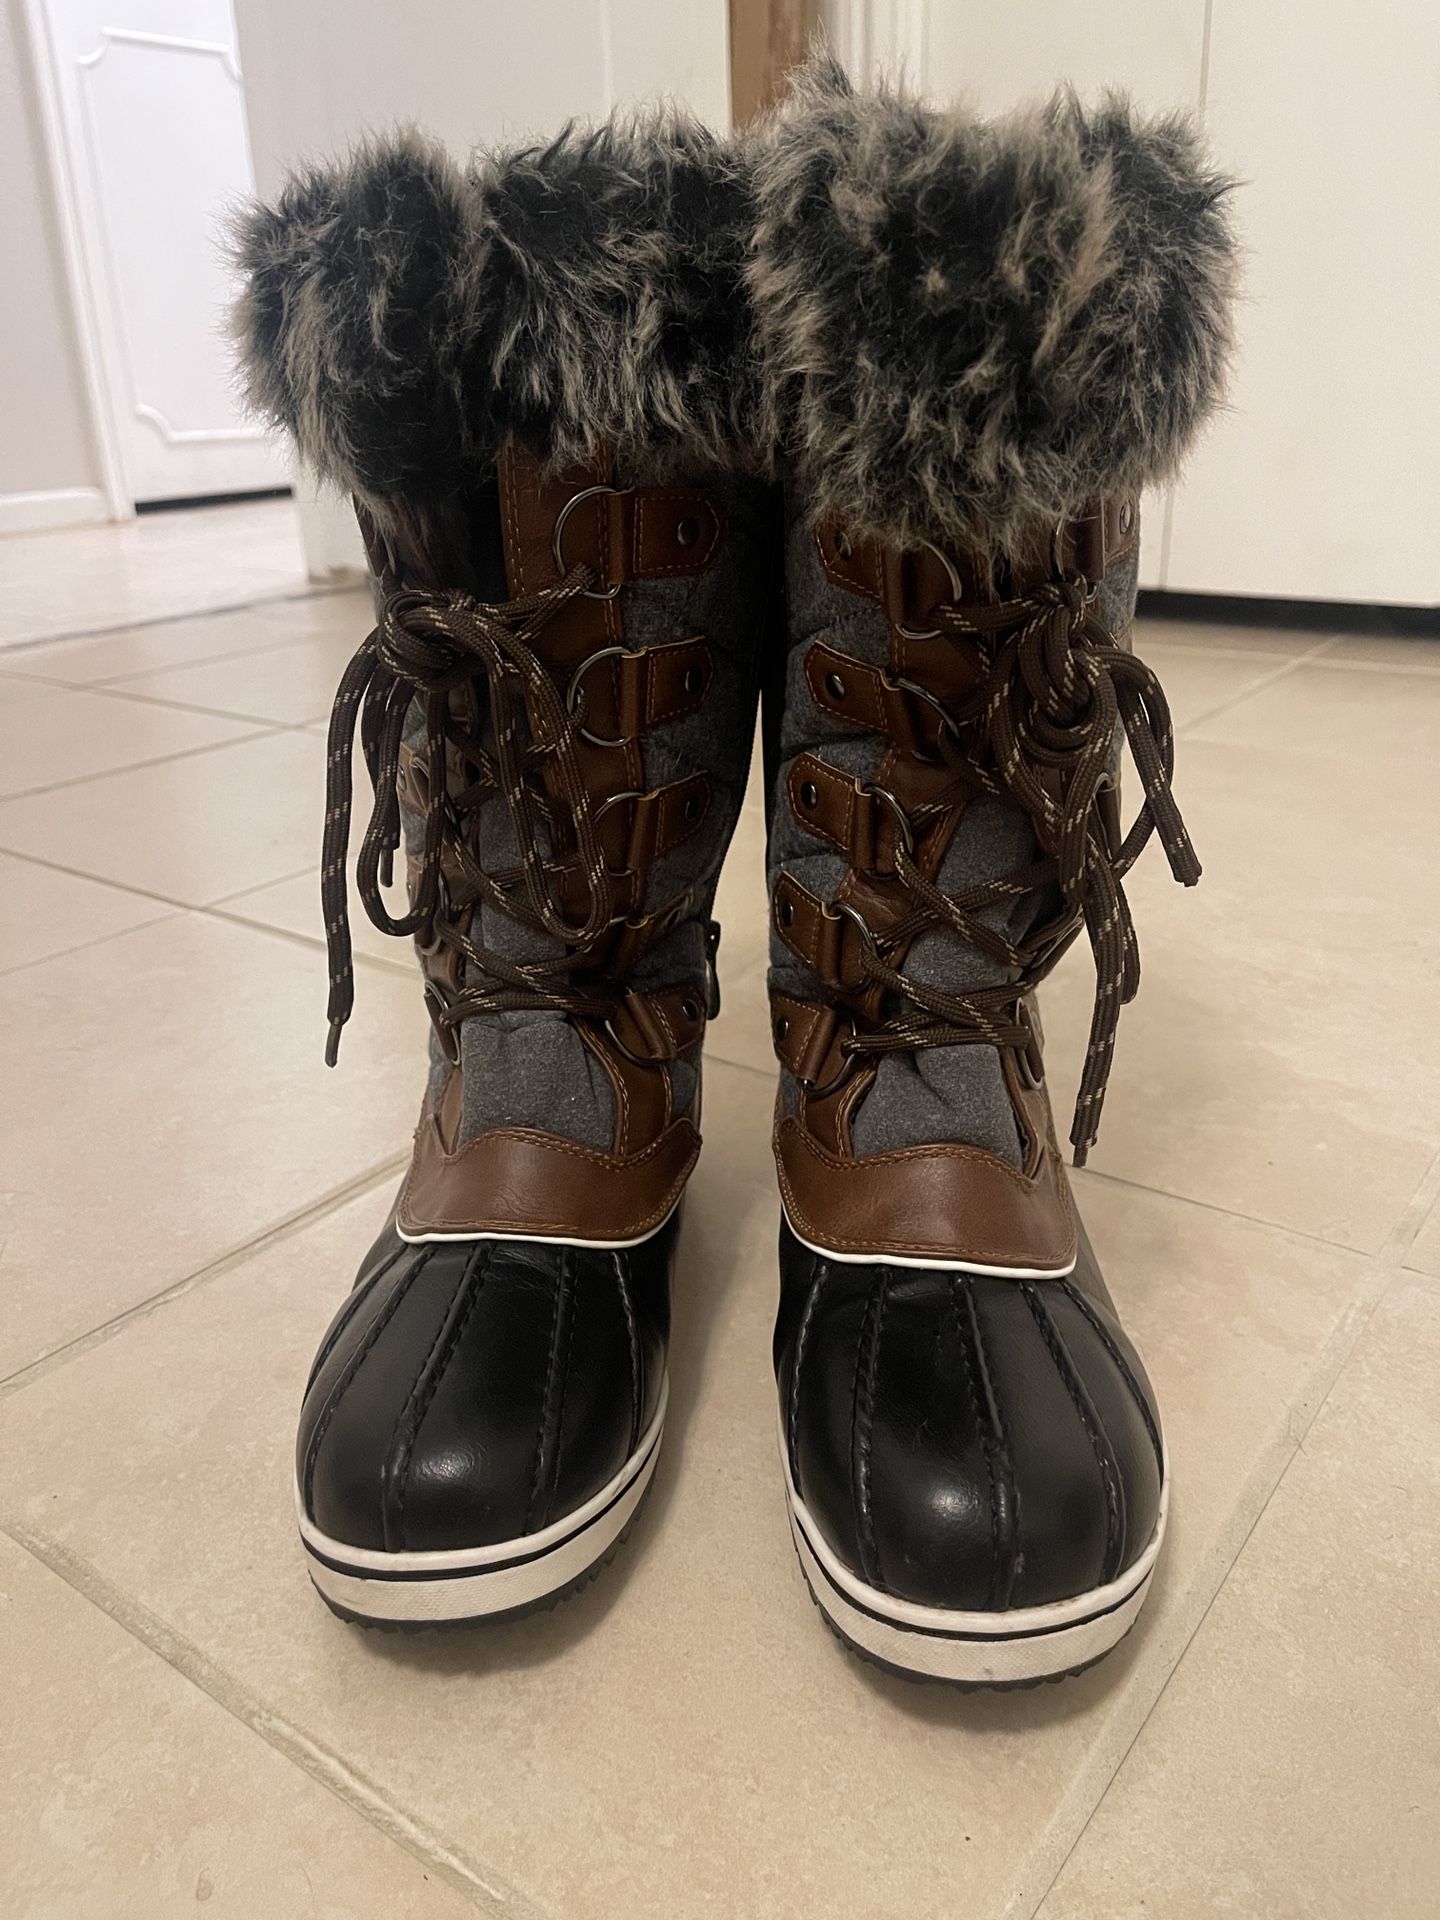 Dream Pairs Snow Boots - Women’s size 8